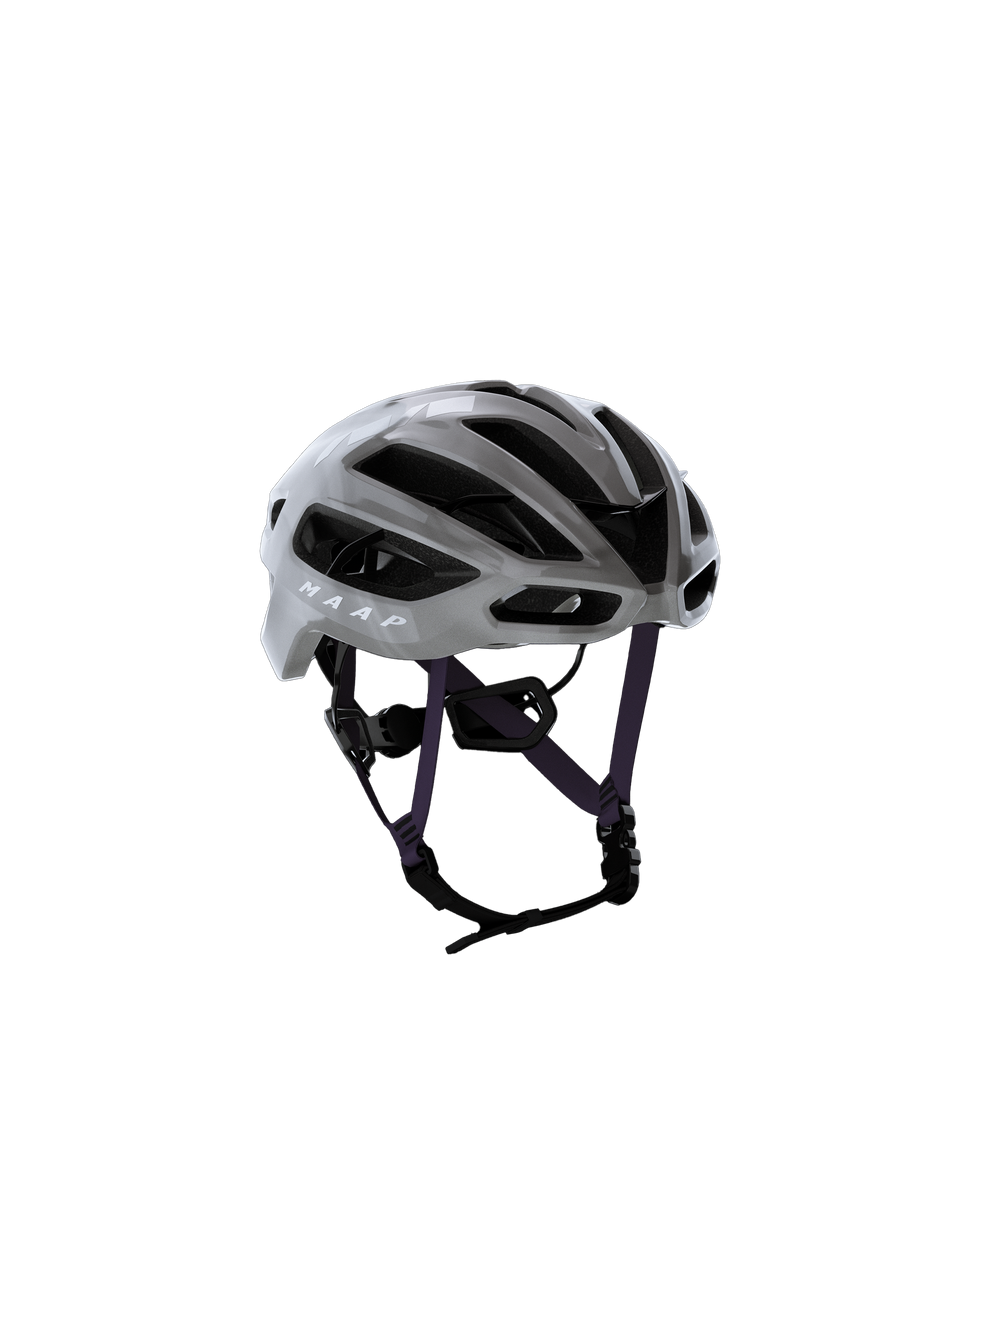 Product Image for MAAP x KASK Protone Icon CE